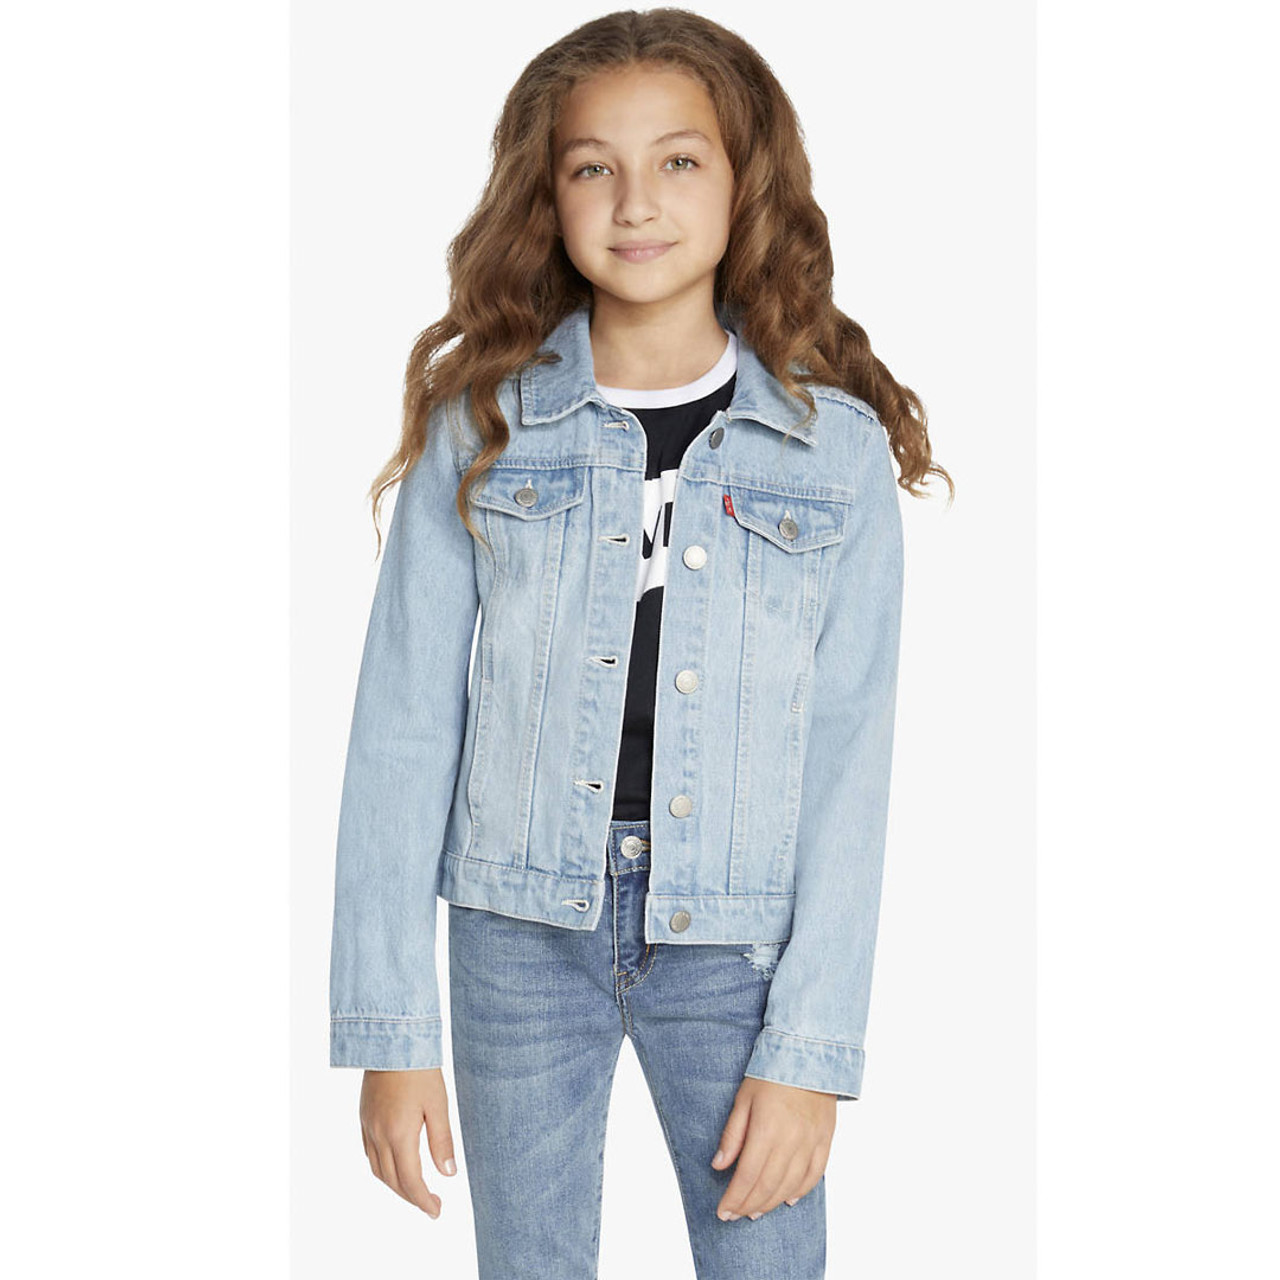 Girls Collar Neck Denim colors jackets at Rs 195 in Delhi | ID: 22872083188